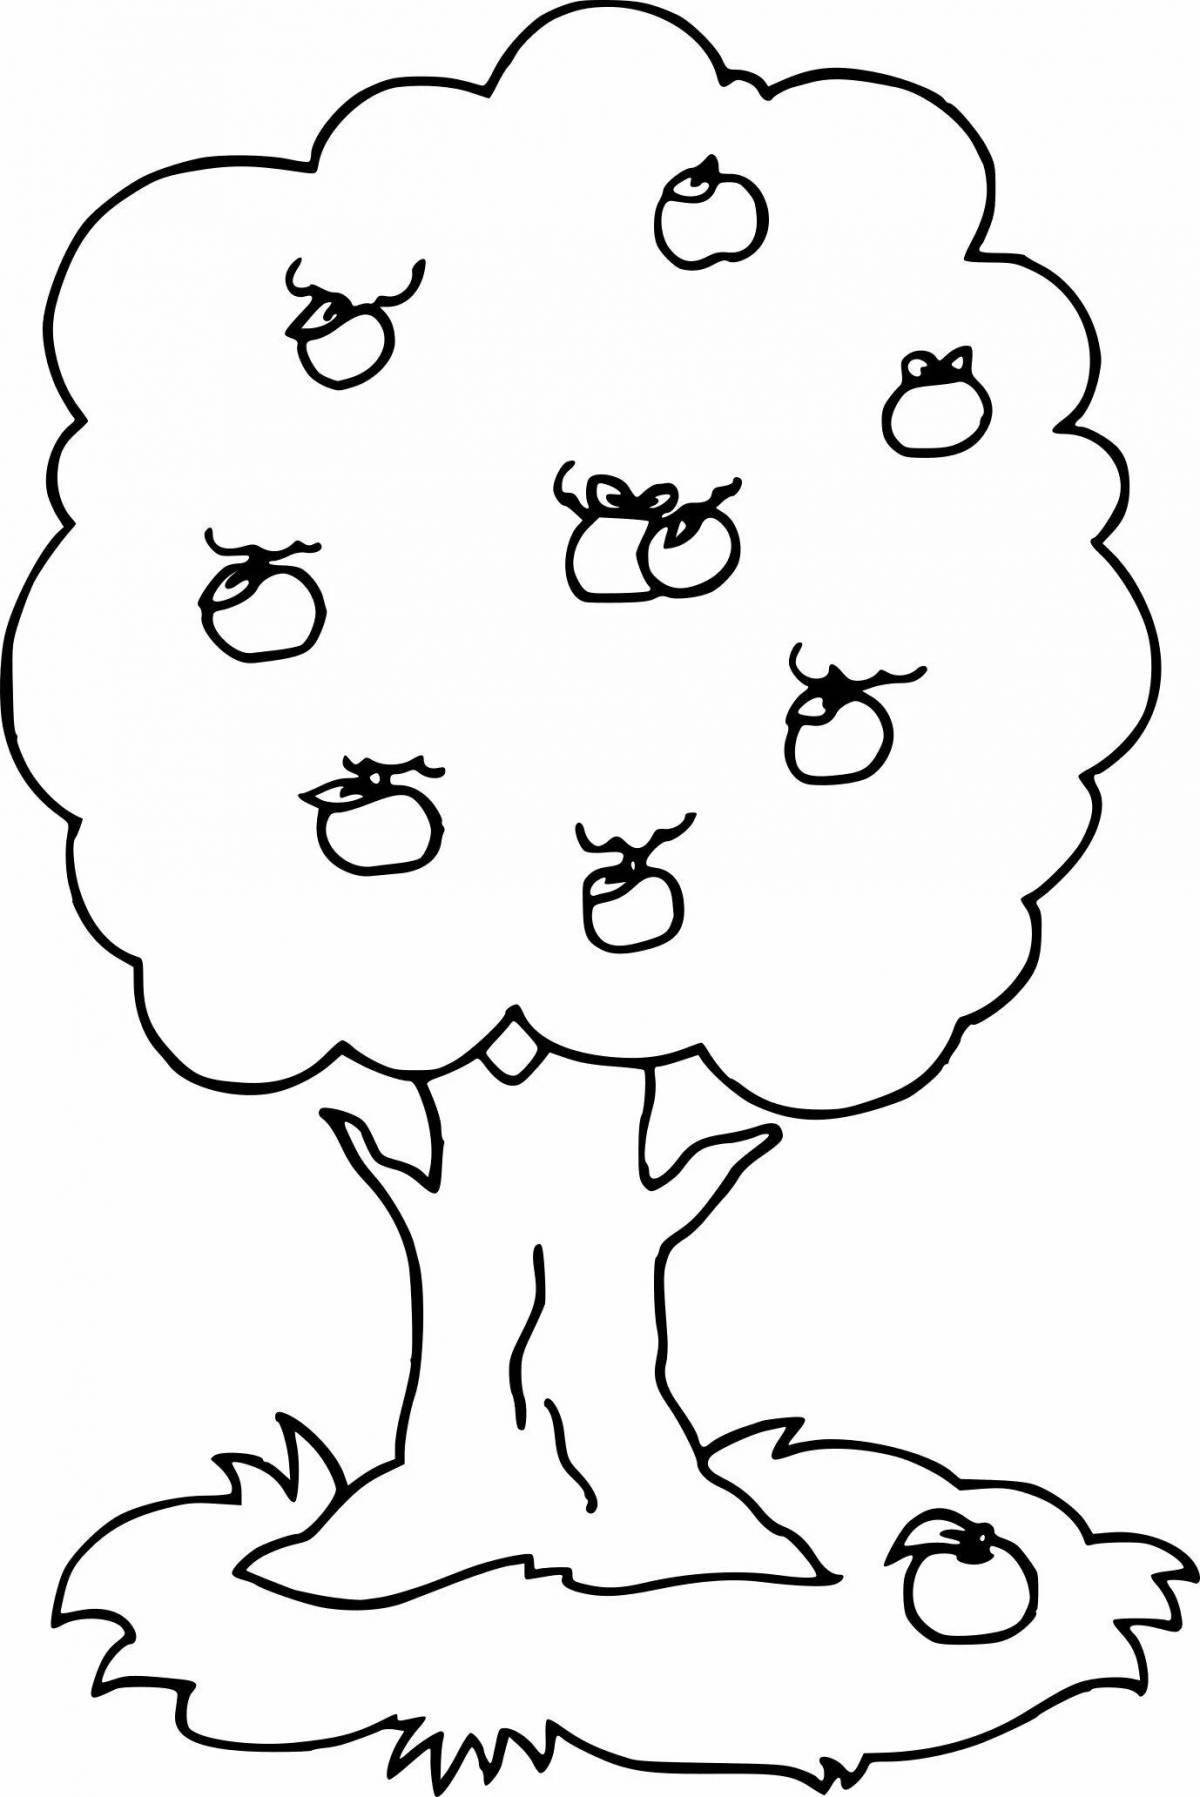 Innovative tree coloring book for 3-4 year olds